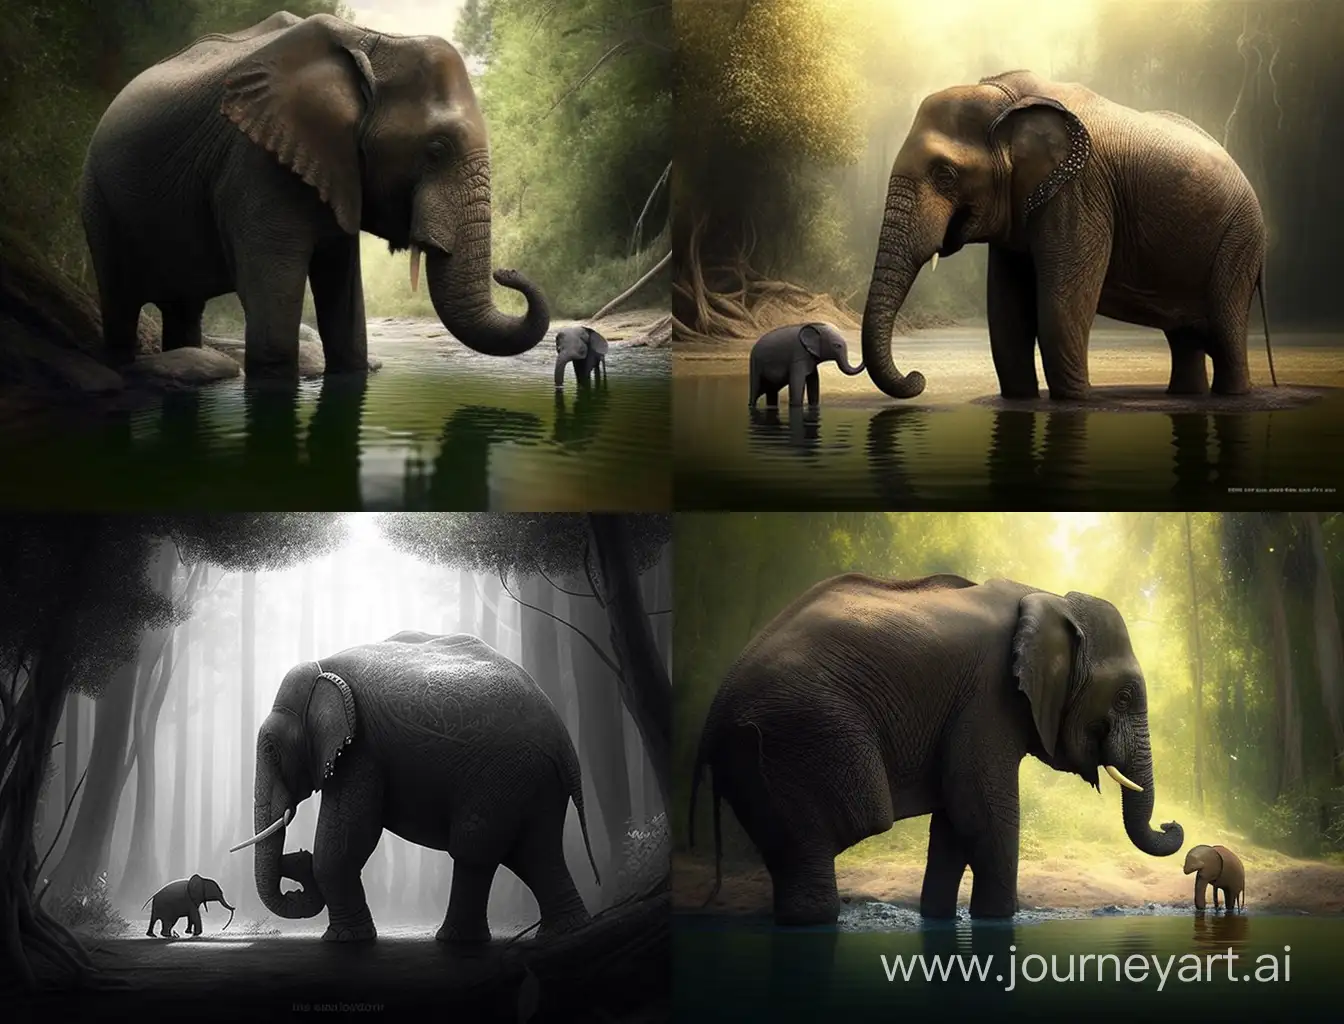 Ancient-Tale-Elephant-and-Turtles-Lesson-in-Perseverance